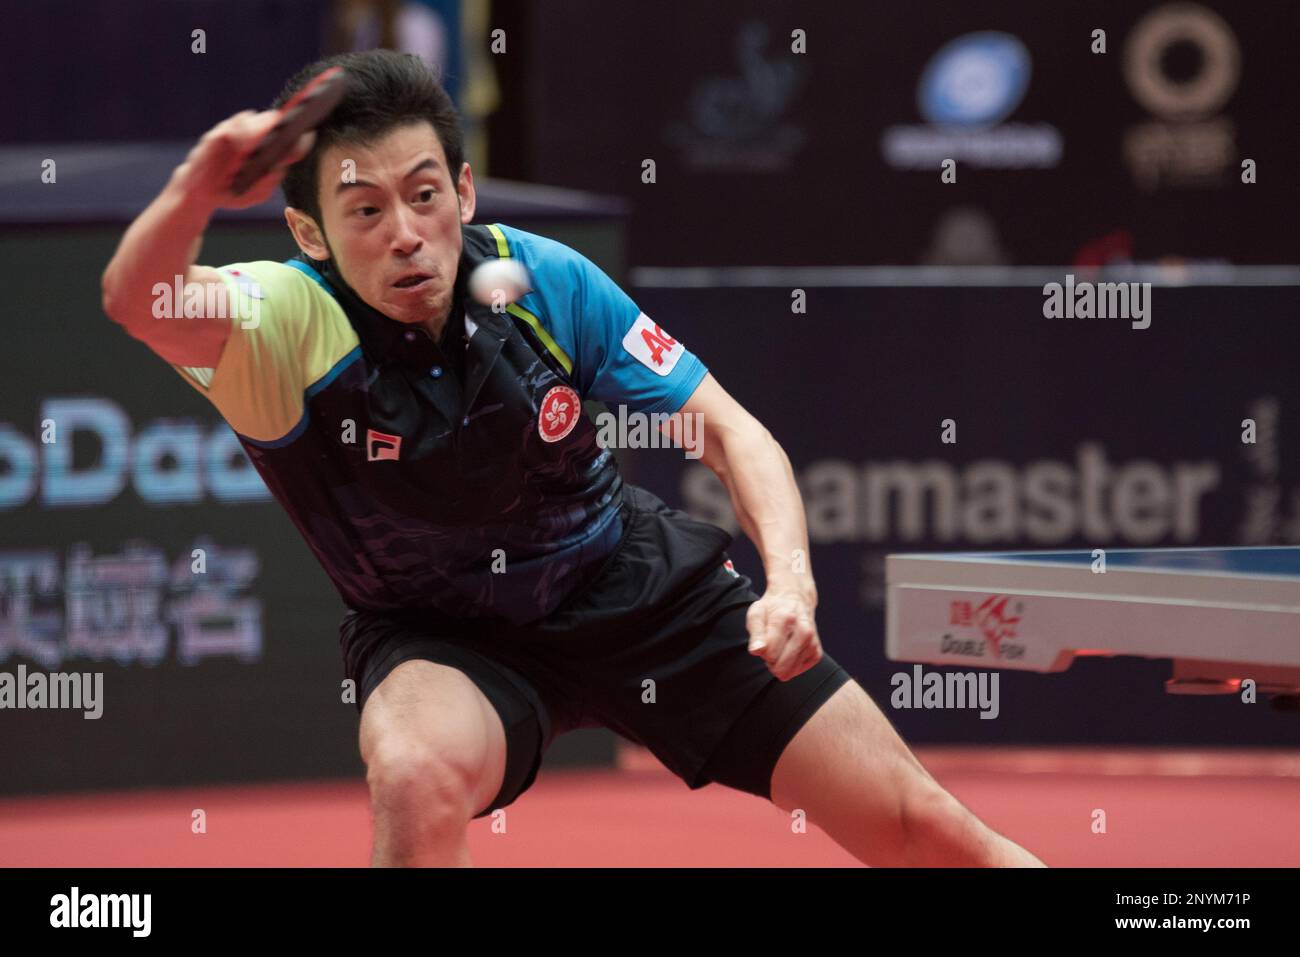 Wong Chun Ting of Hong Kong returns a shot to Dimitrij Ovtcharov of Germany in their semifinal match of the mens singles during the Seamaster 2017 ITTF World Tour Platinum China Open